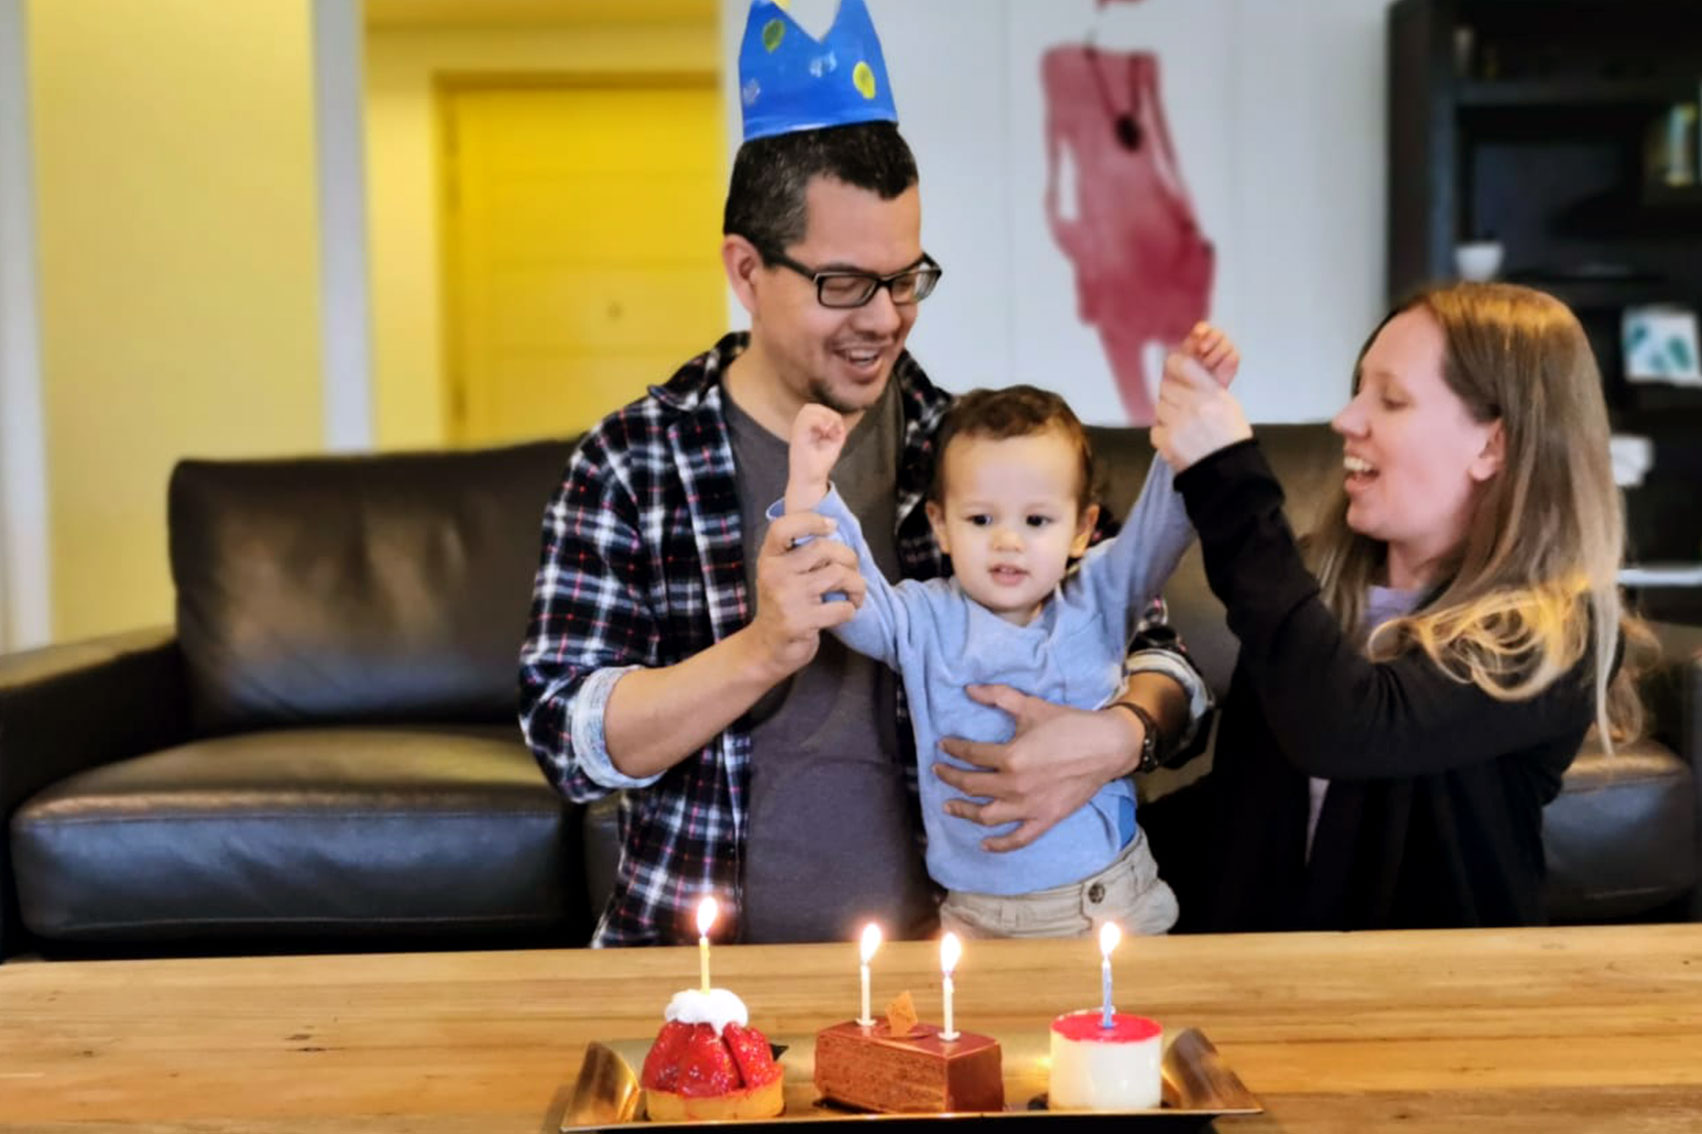 Sarah with husband and Issac celebrating the child's birthday with a cake and candles.